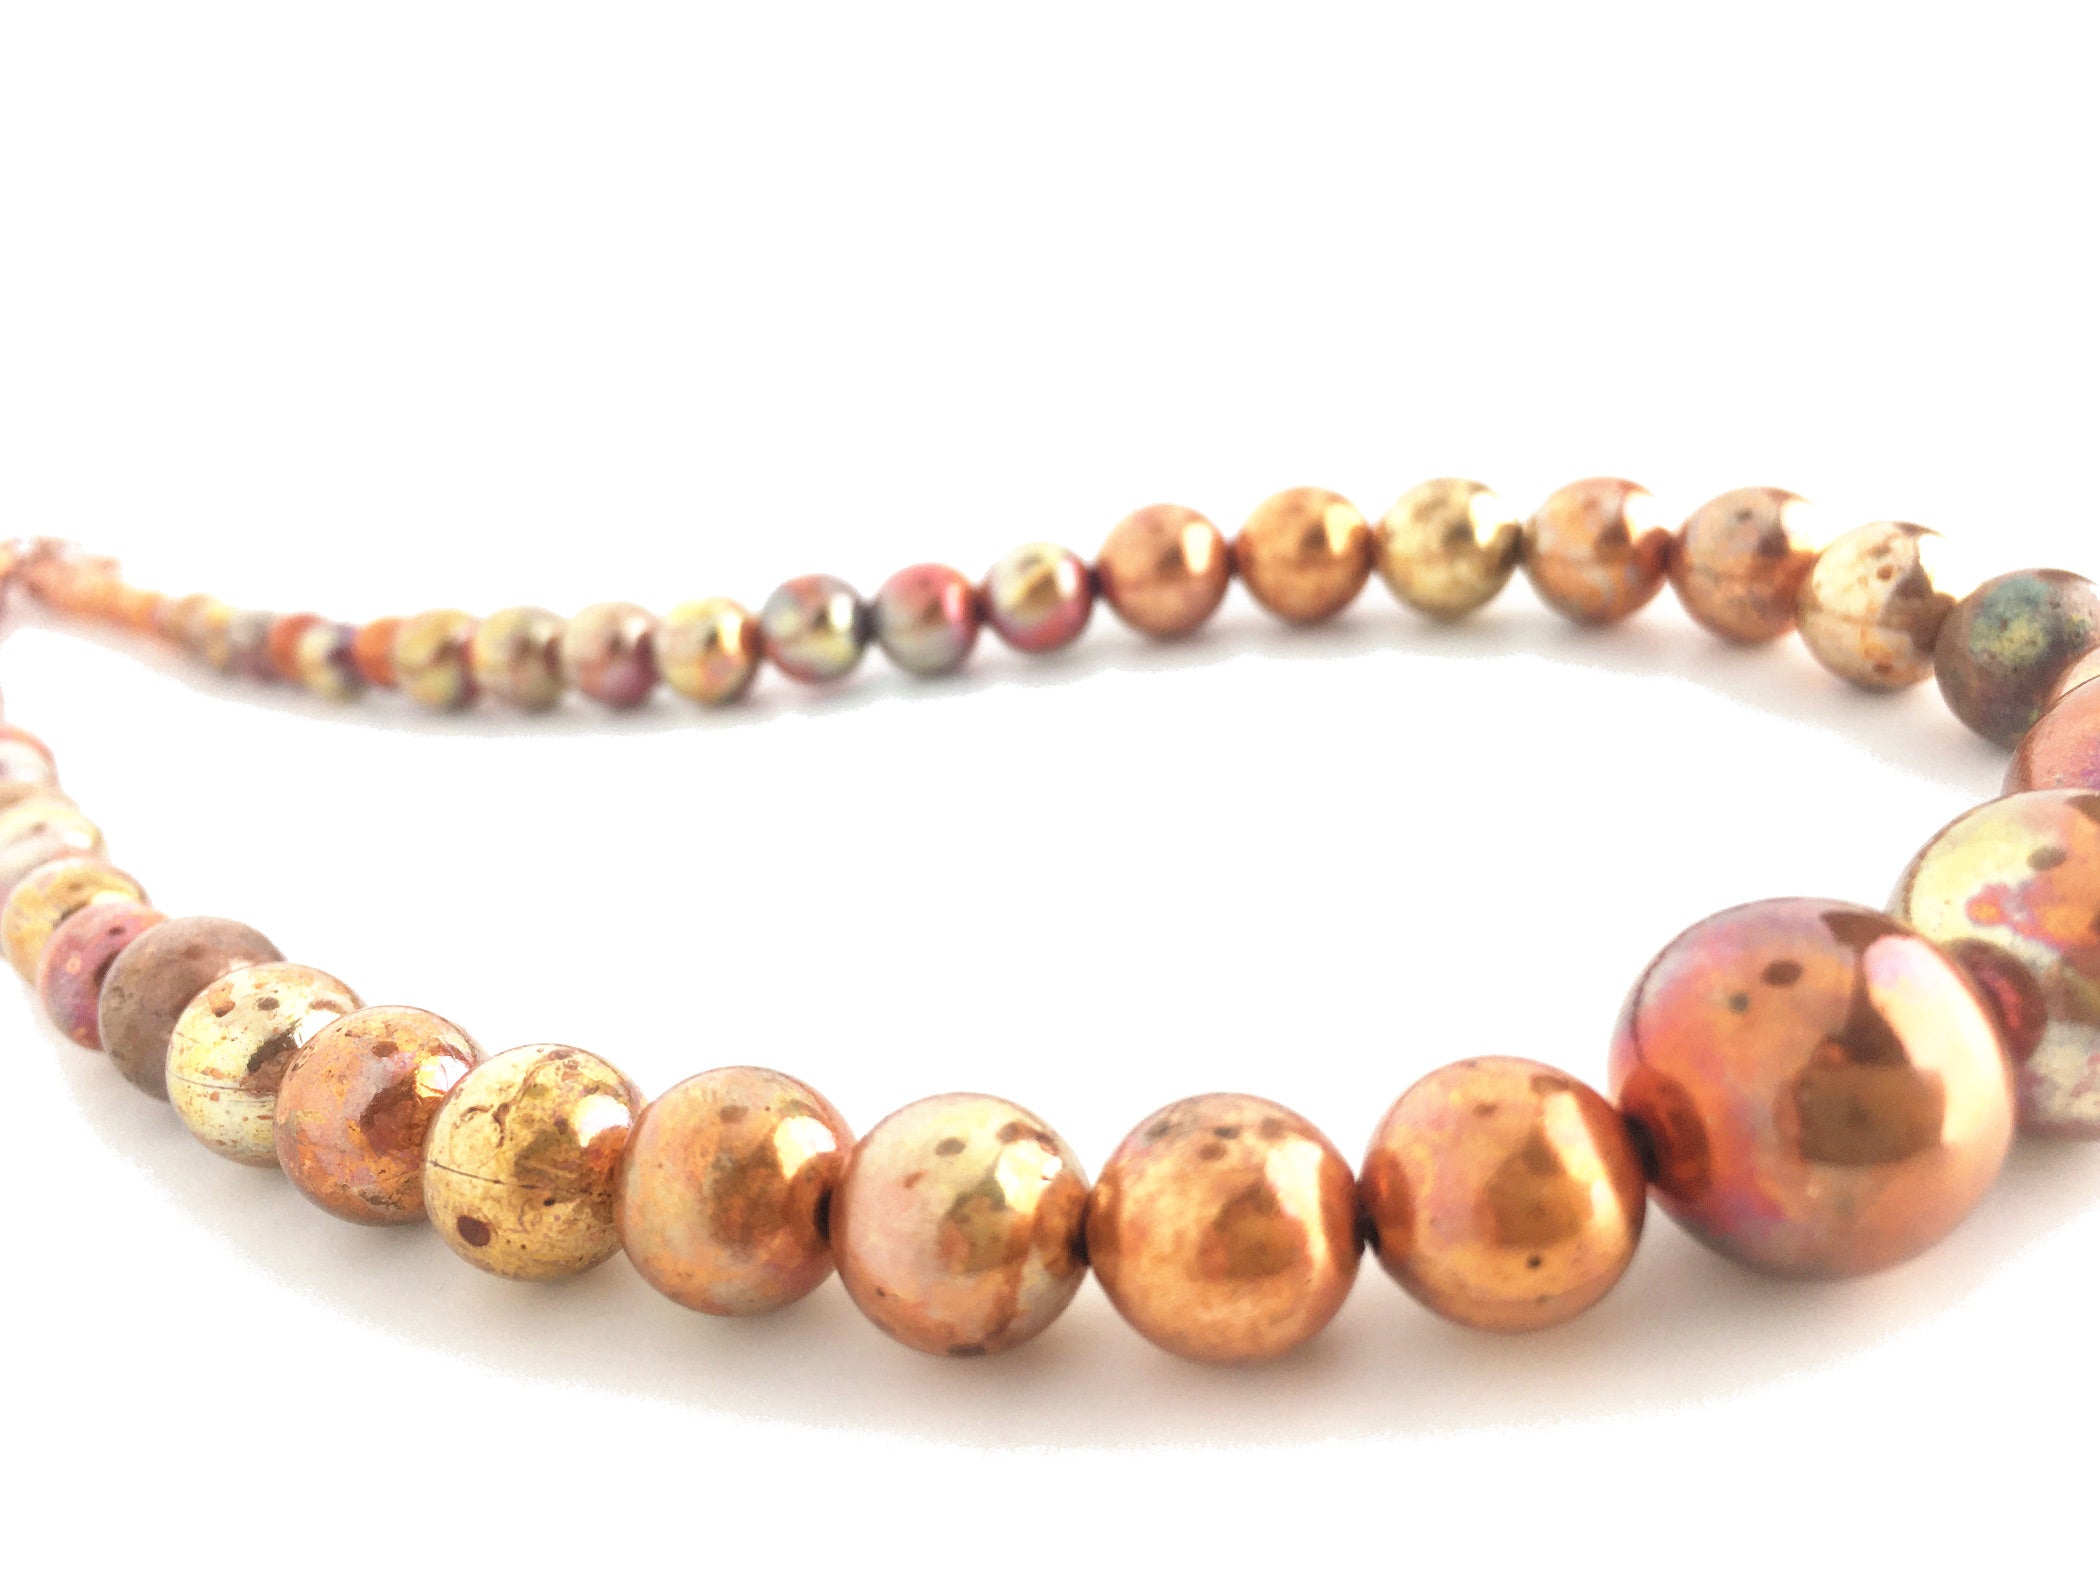 Sonoran Sunset Graduated Copper Strand Necklace